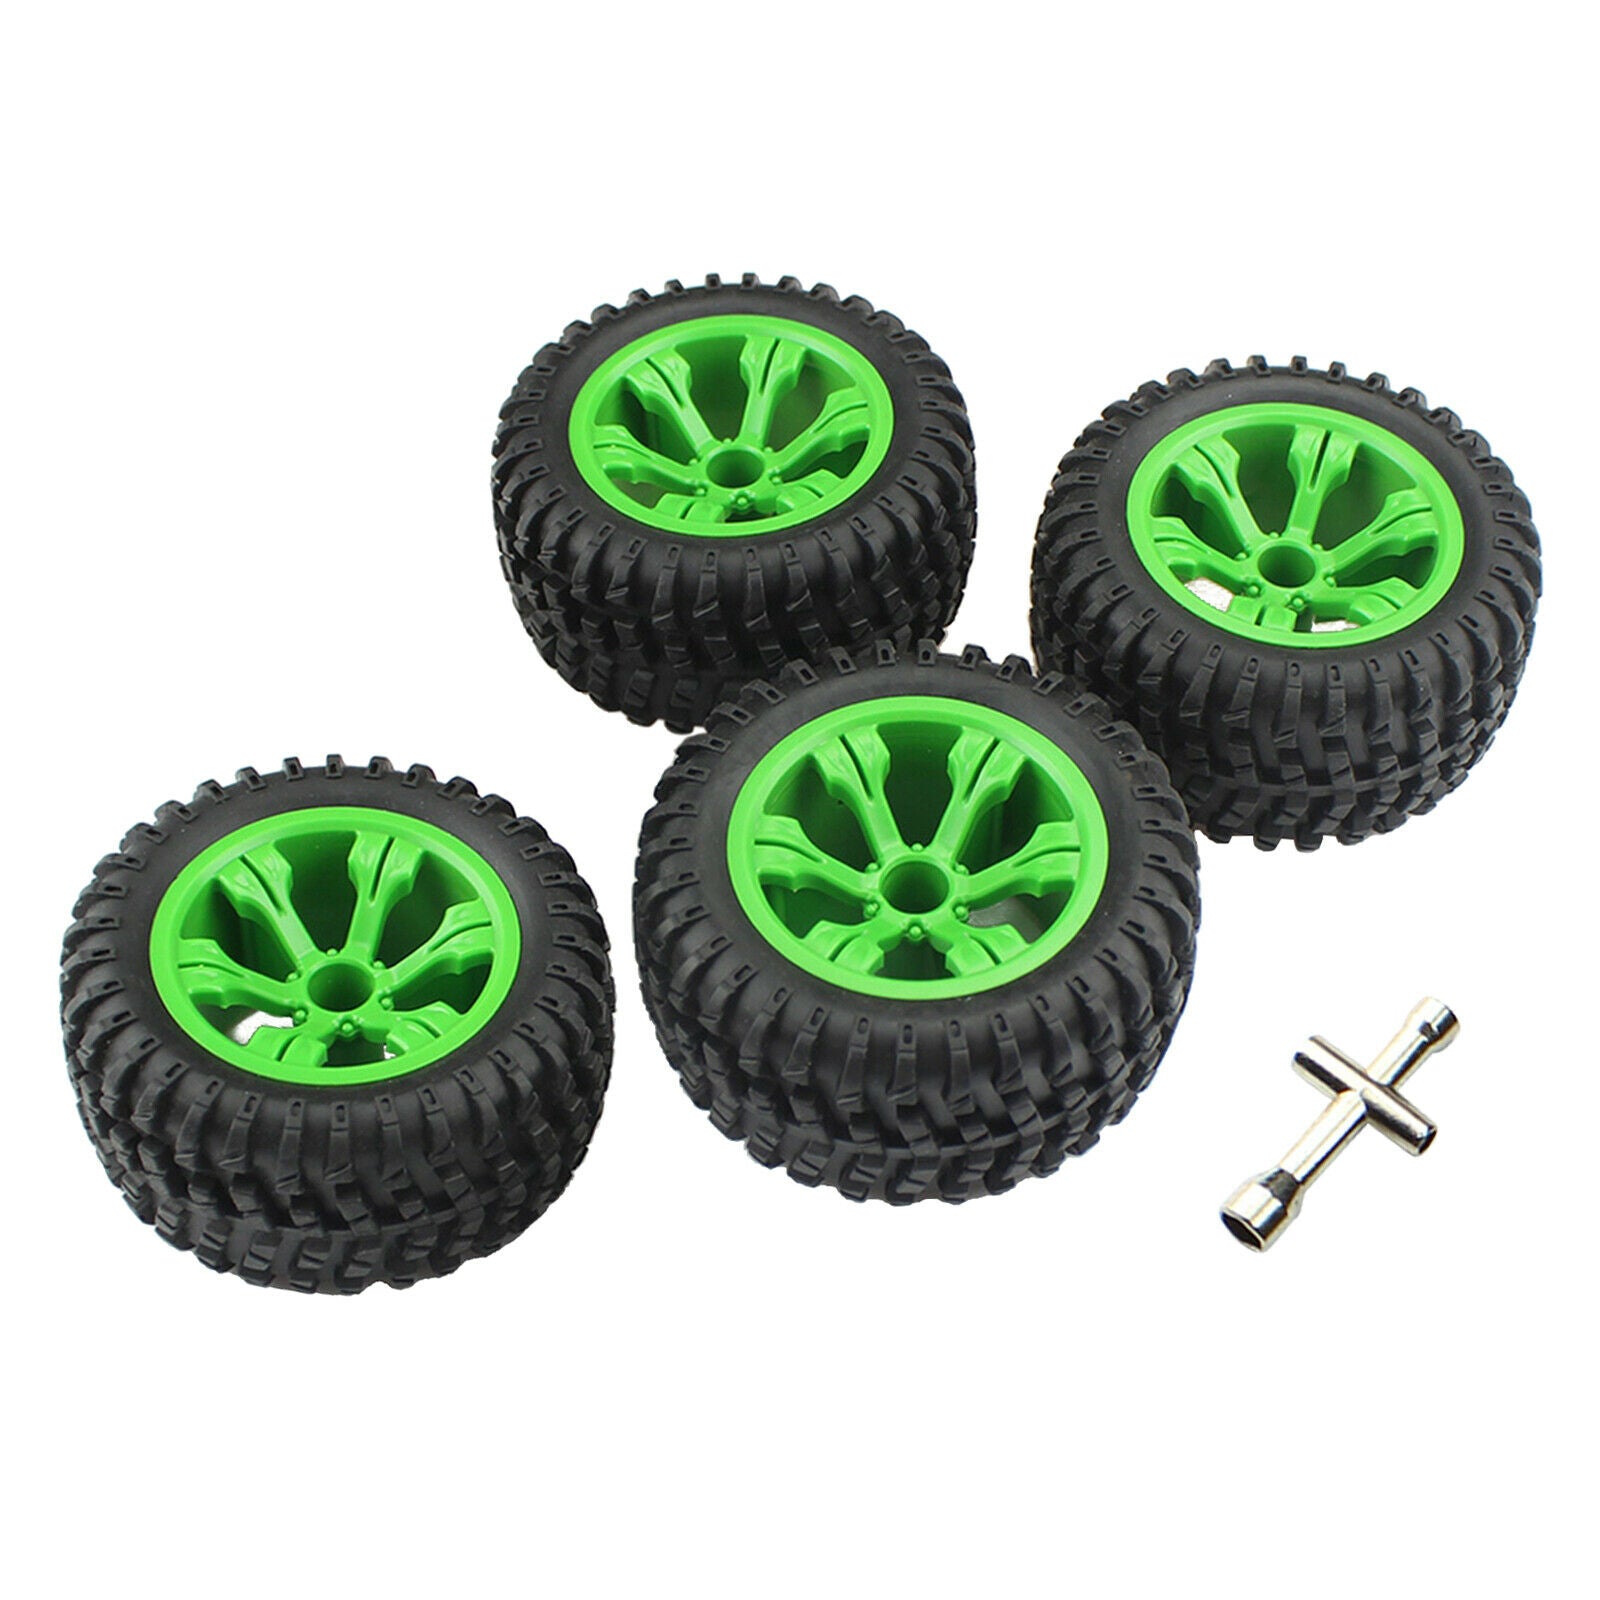 Remote Control Cars Upgrade Tyres 110cm for Wltoys 12428 144001 12428-A 1/12